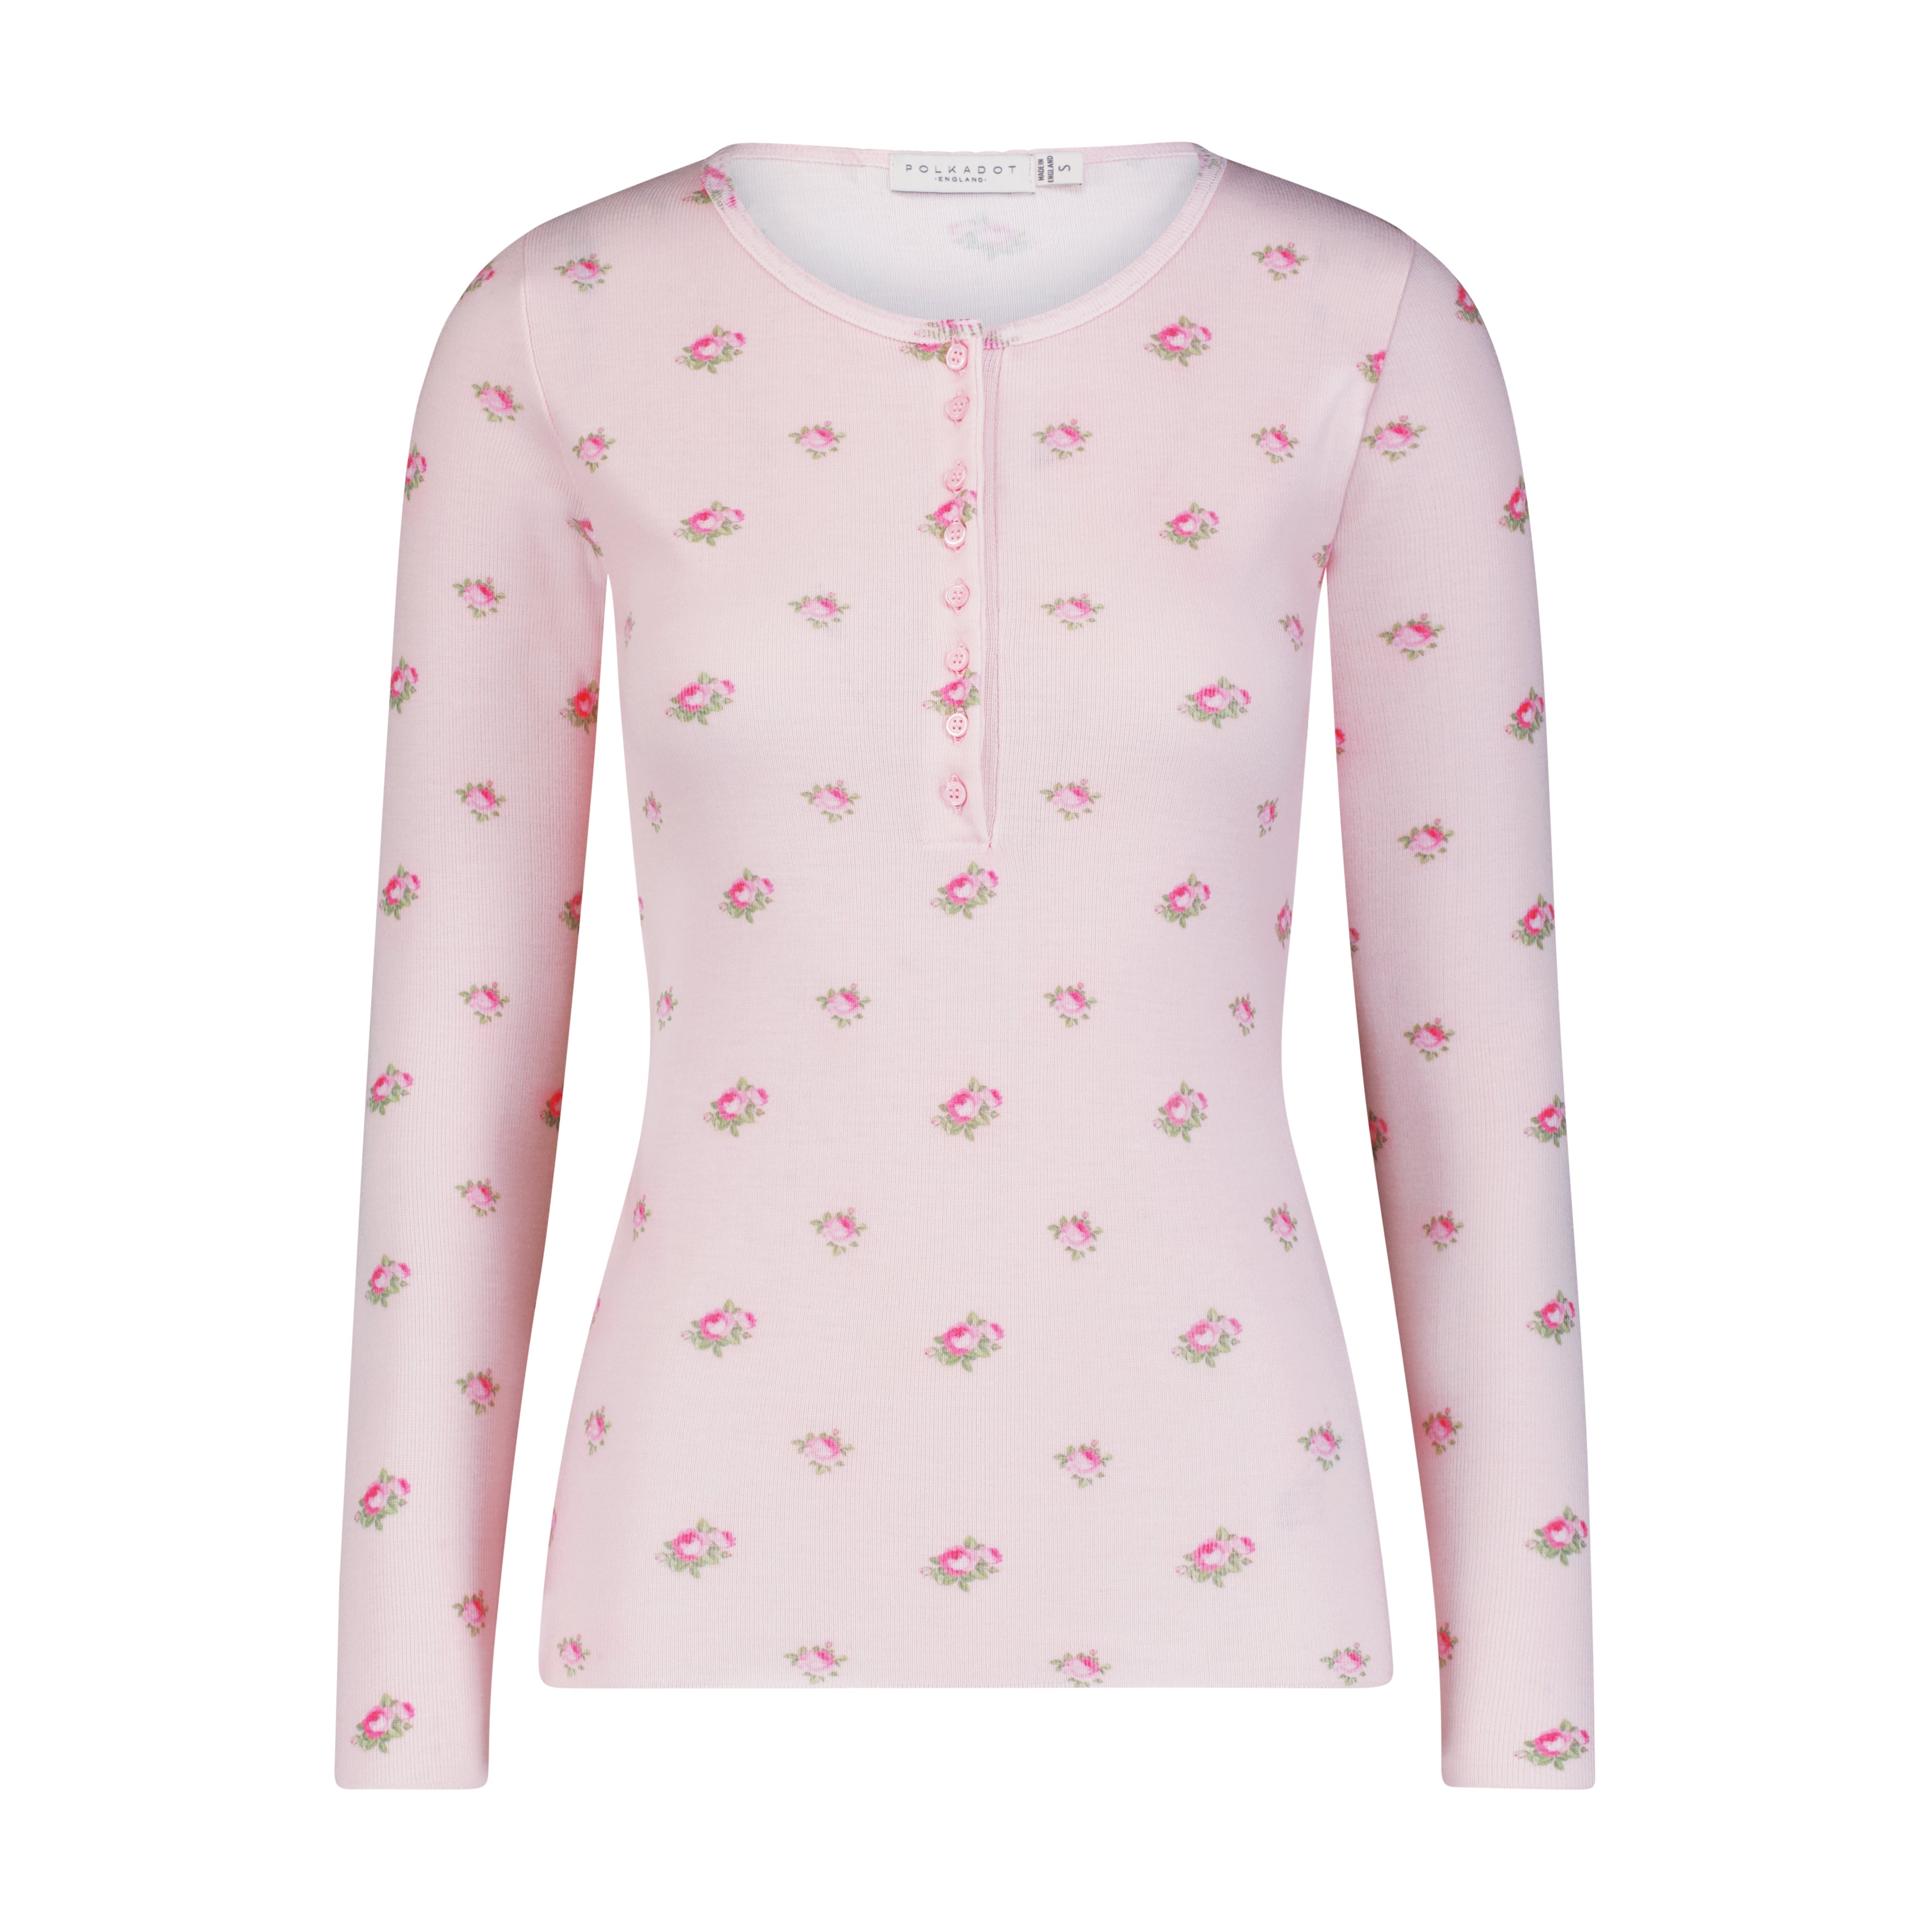 HENLEY 8 Button Fitted LS Pink Vintage Rose Print